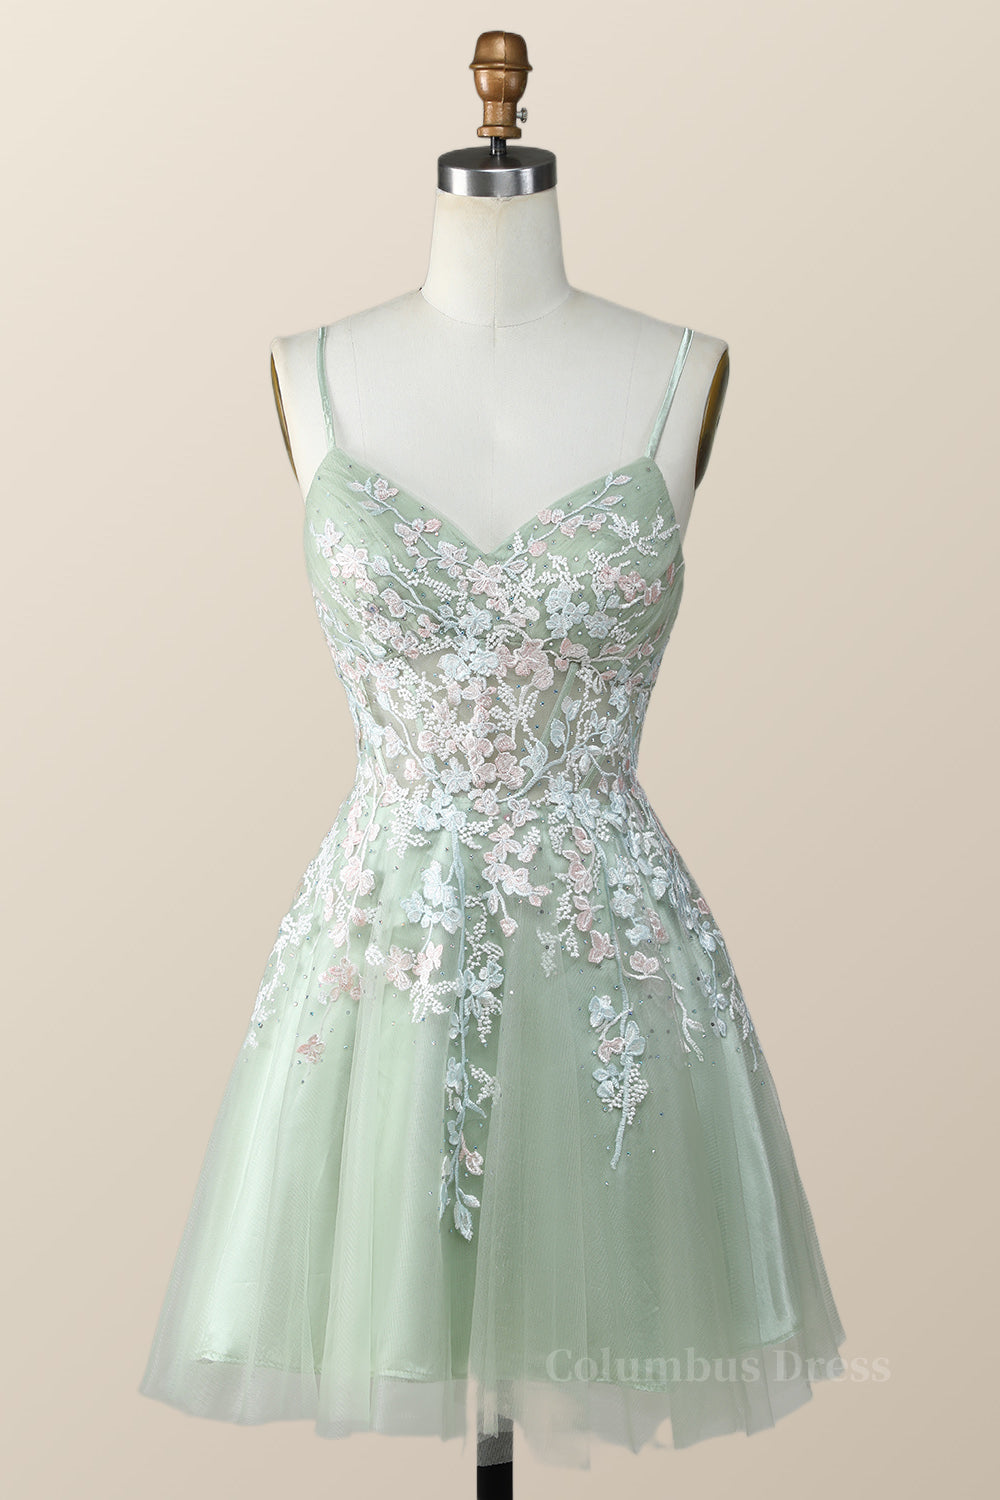 Sage Green Tulle Floral Embroidered A-line Corset Homecoming Dress outfit, Party Dresses Teens